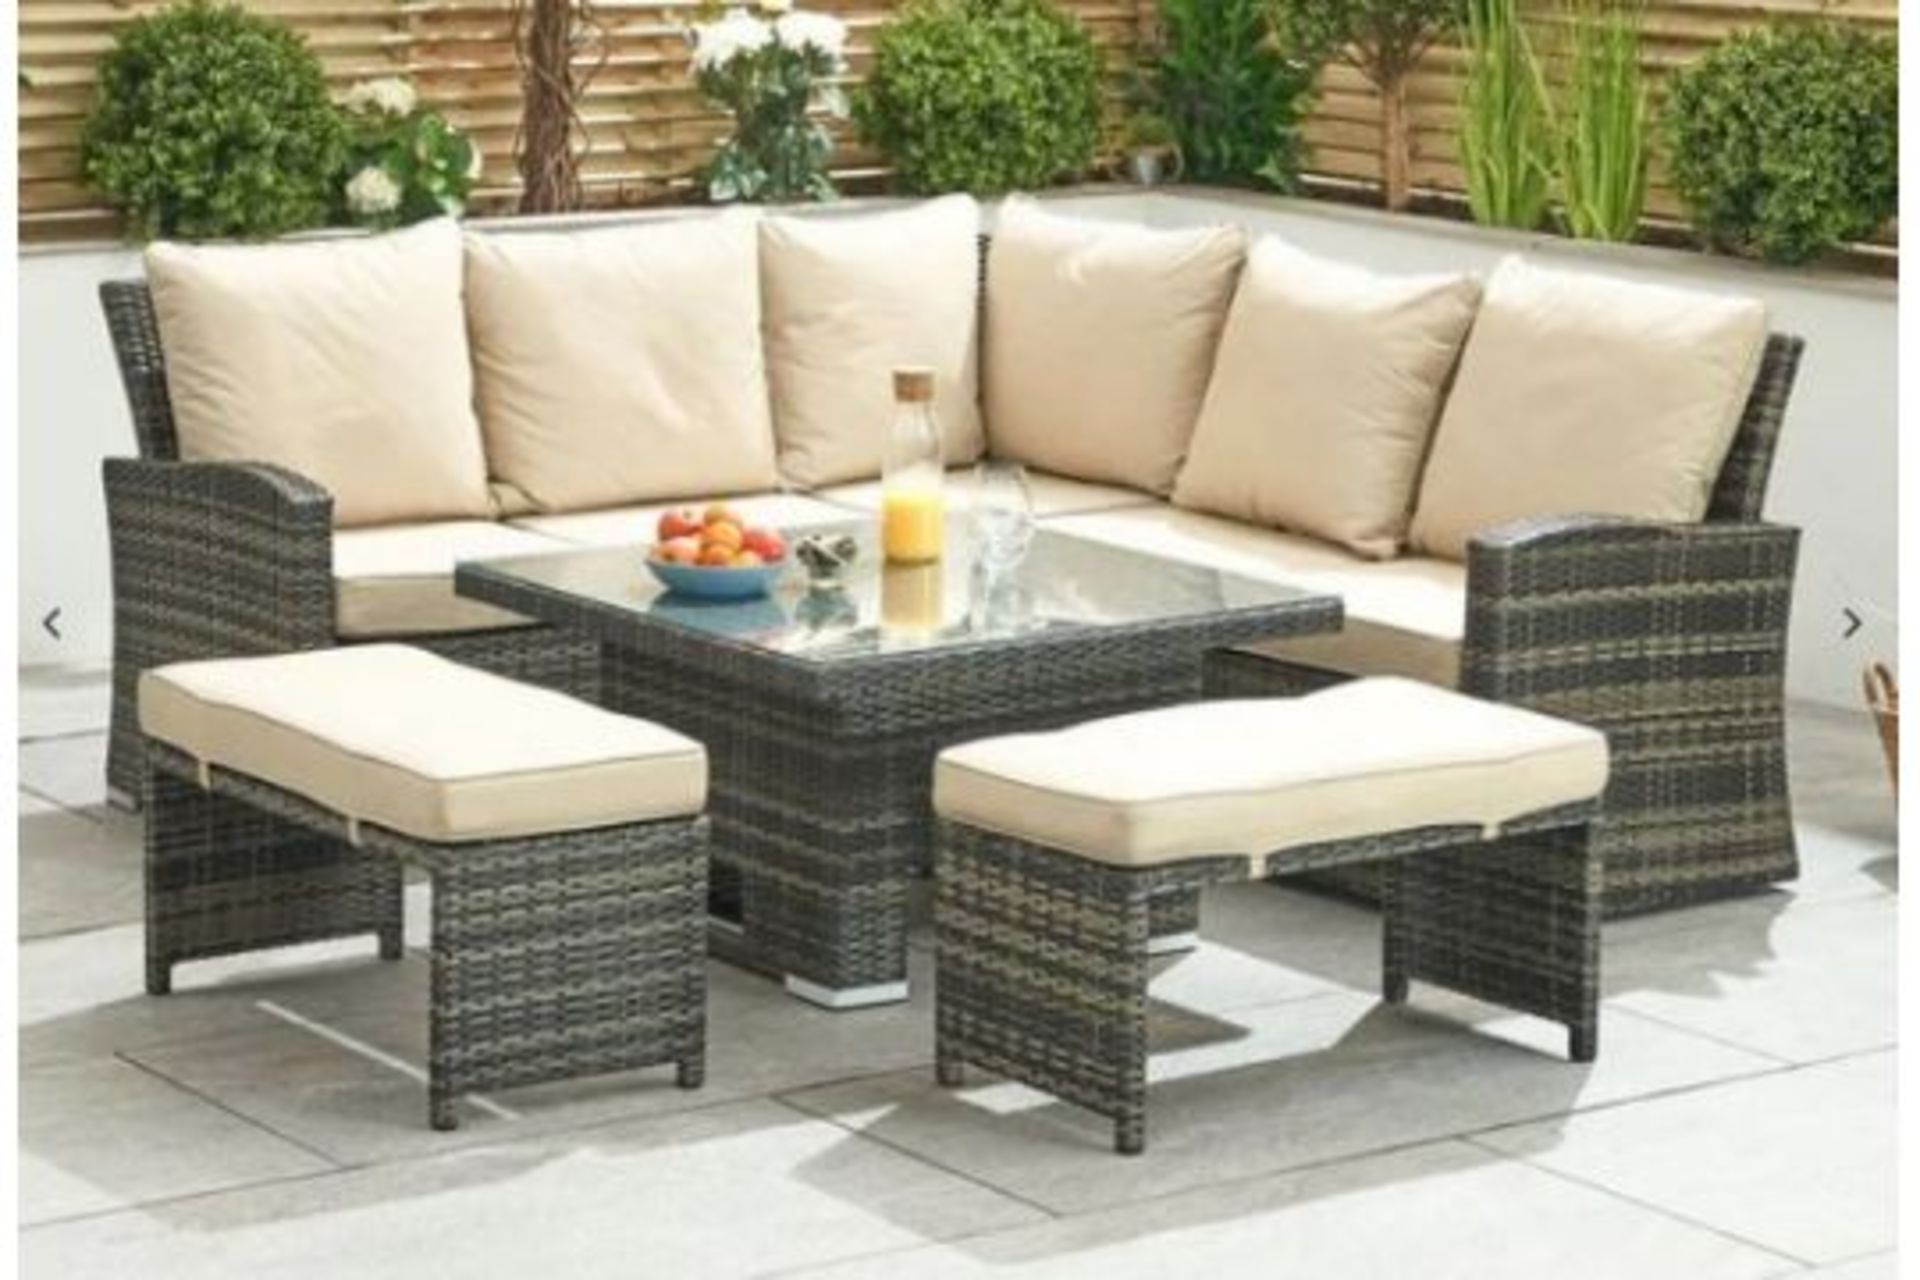 New & Boxed Luxury Nova Garden Furniture Cambridge Brown Weave Compact Corner Dining Set with Rising - Image 4 of 4